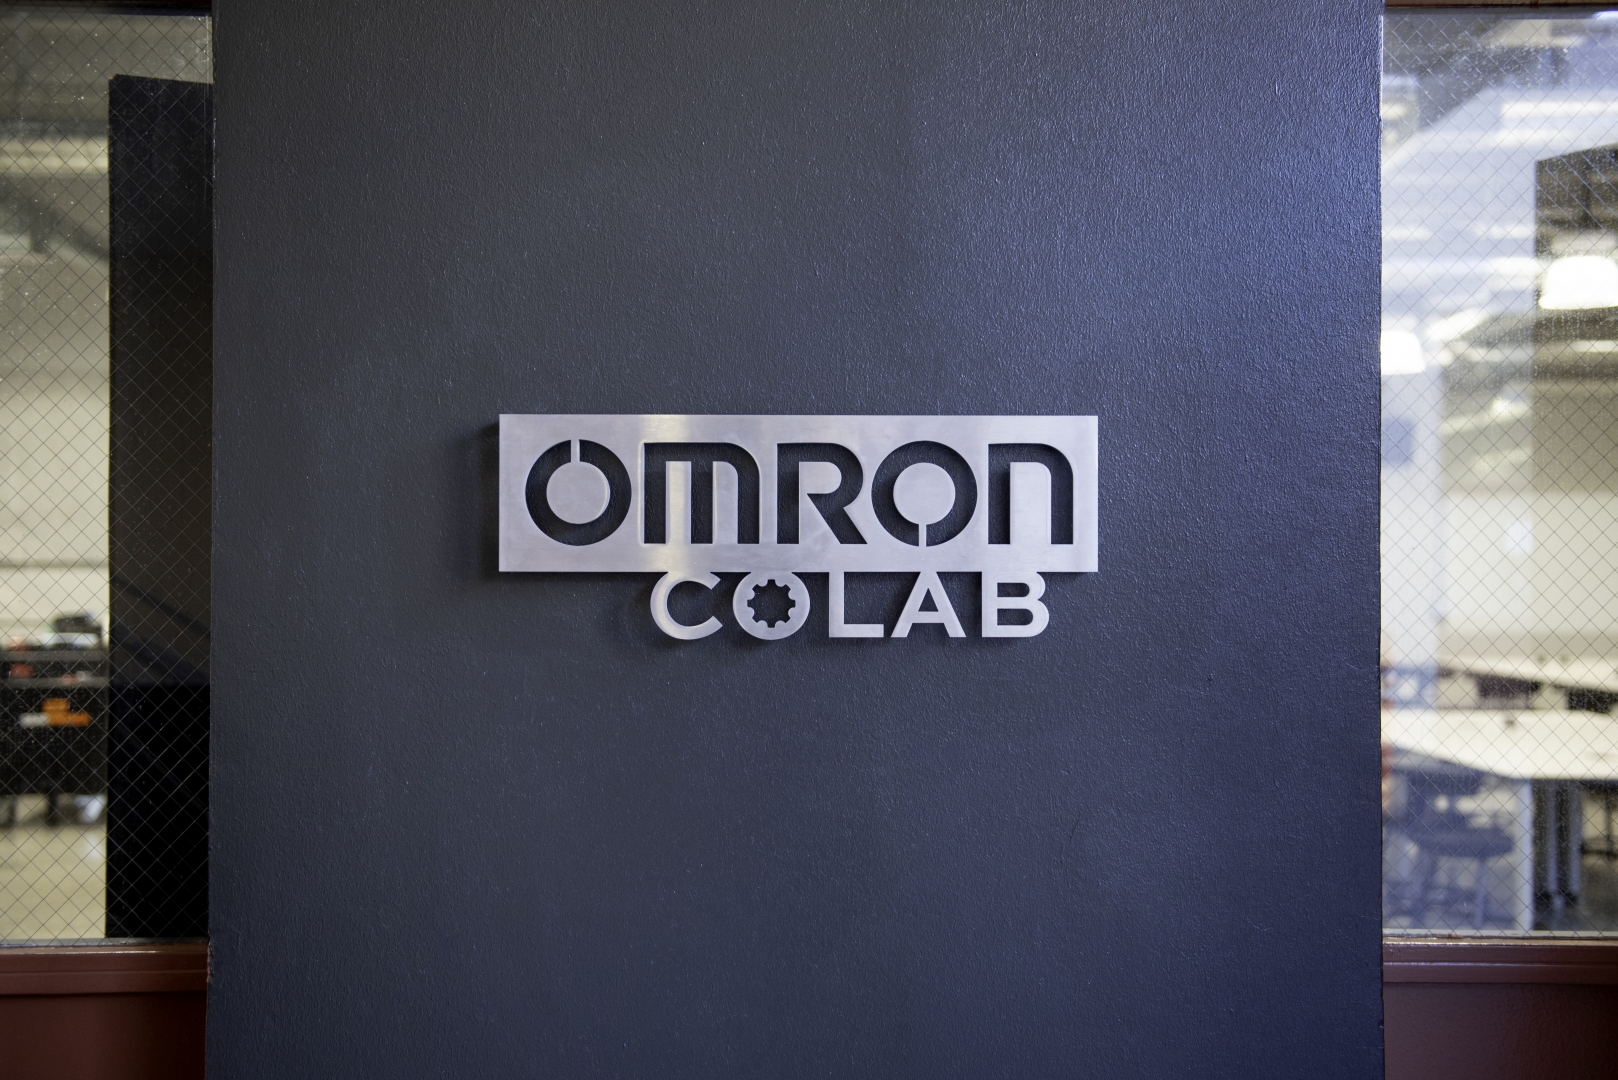 A metal sign saying Omron CoLab hangs on a wall.